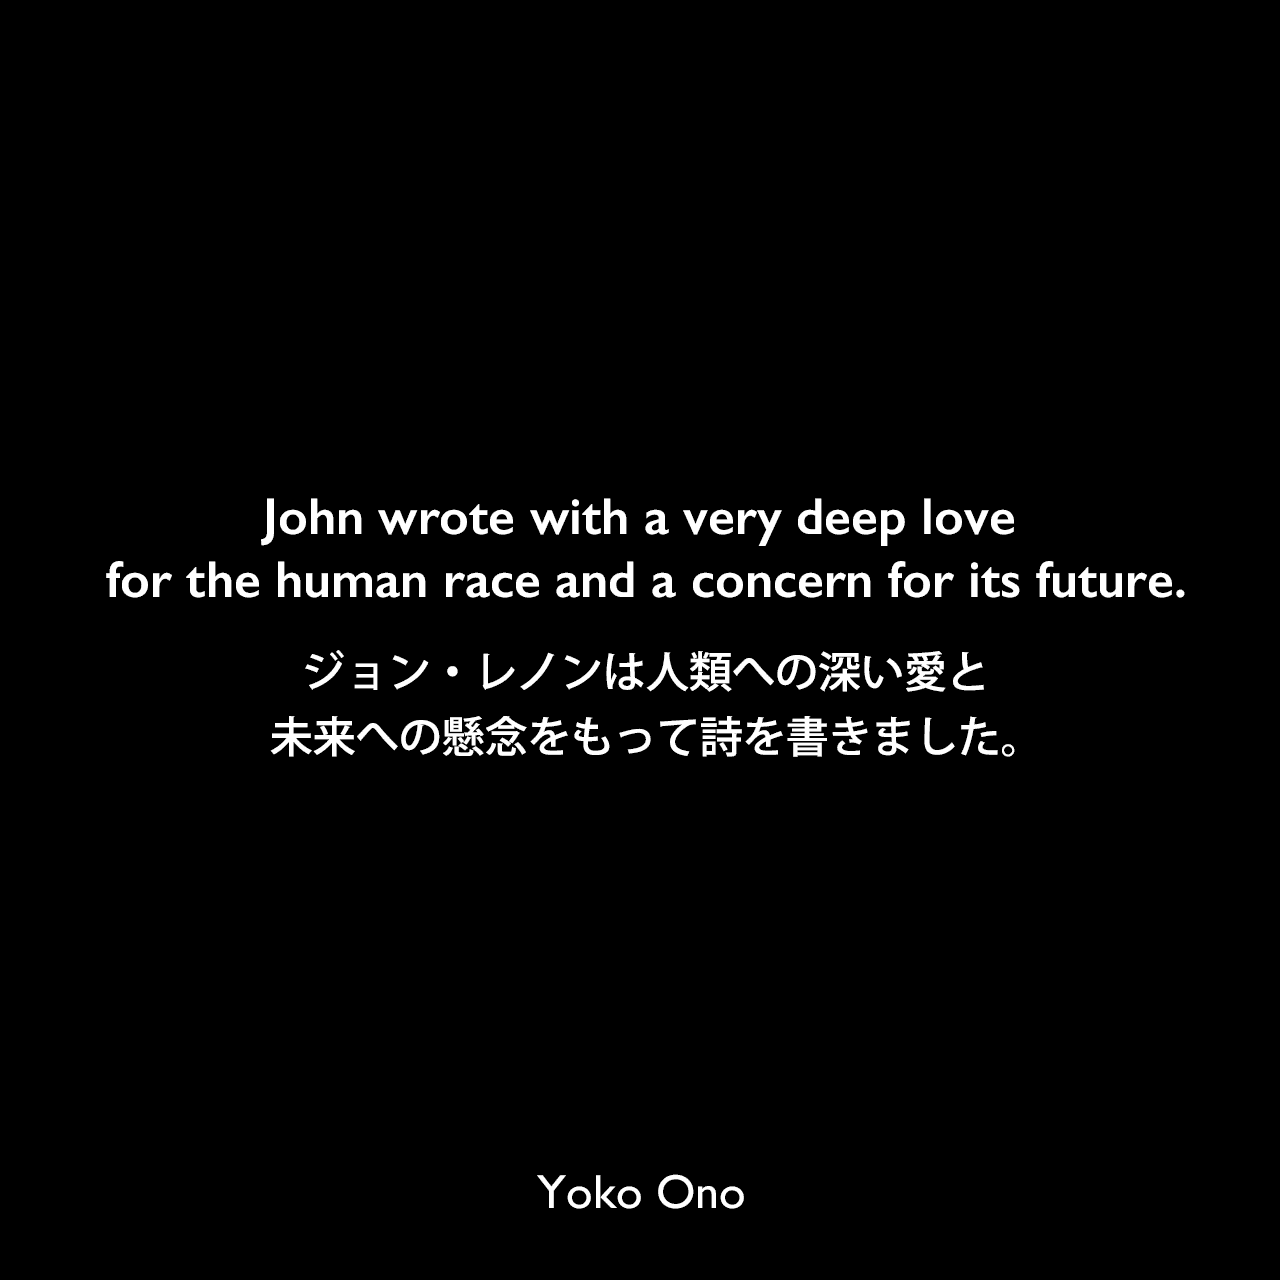 John wrote with a very deep love for the human race and a concern for its future.ジョン・レノンは人類への深い愛と未来への懸念をもって詩を書きました。Yoko Ono